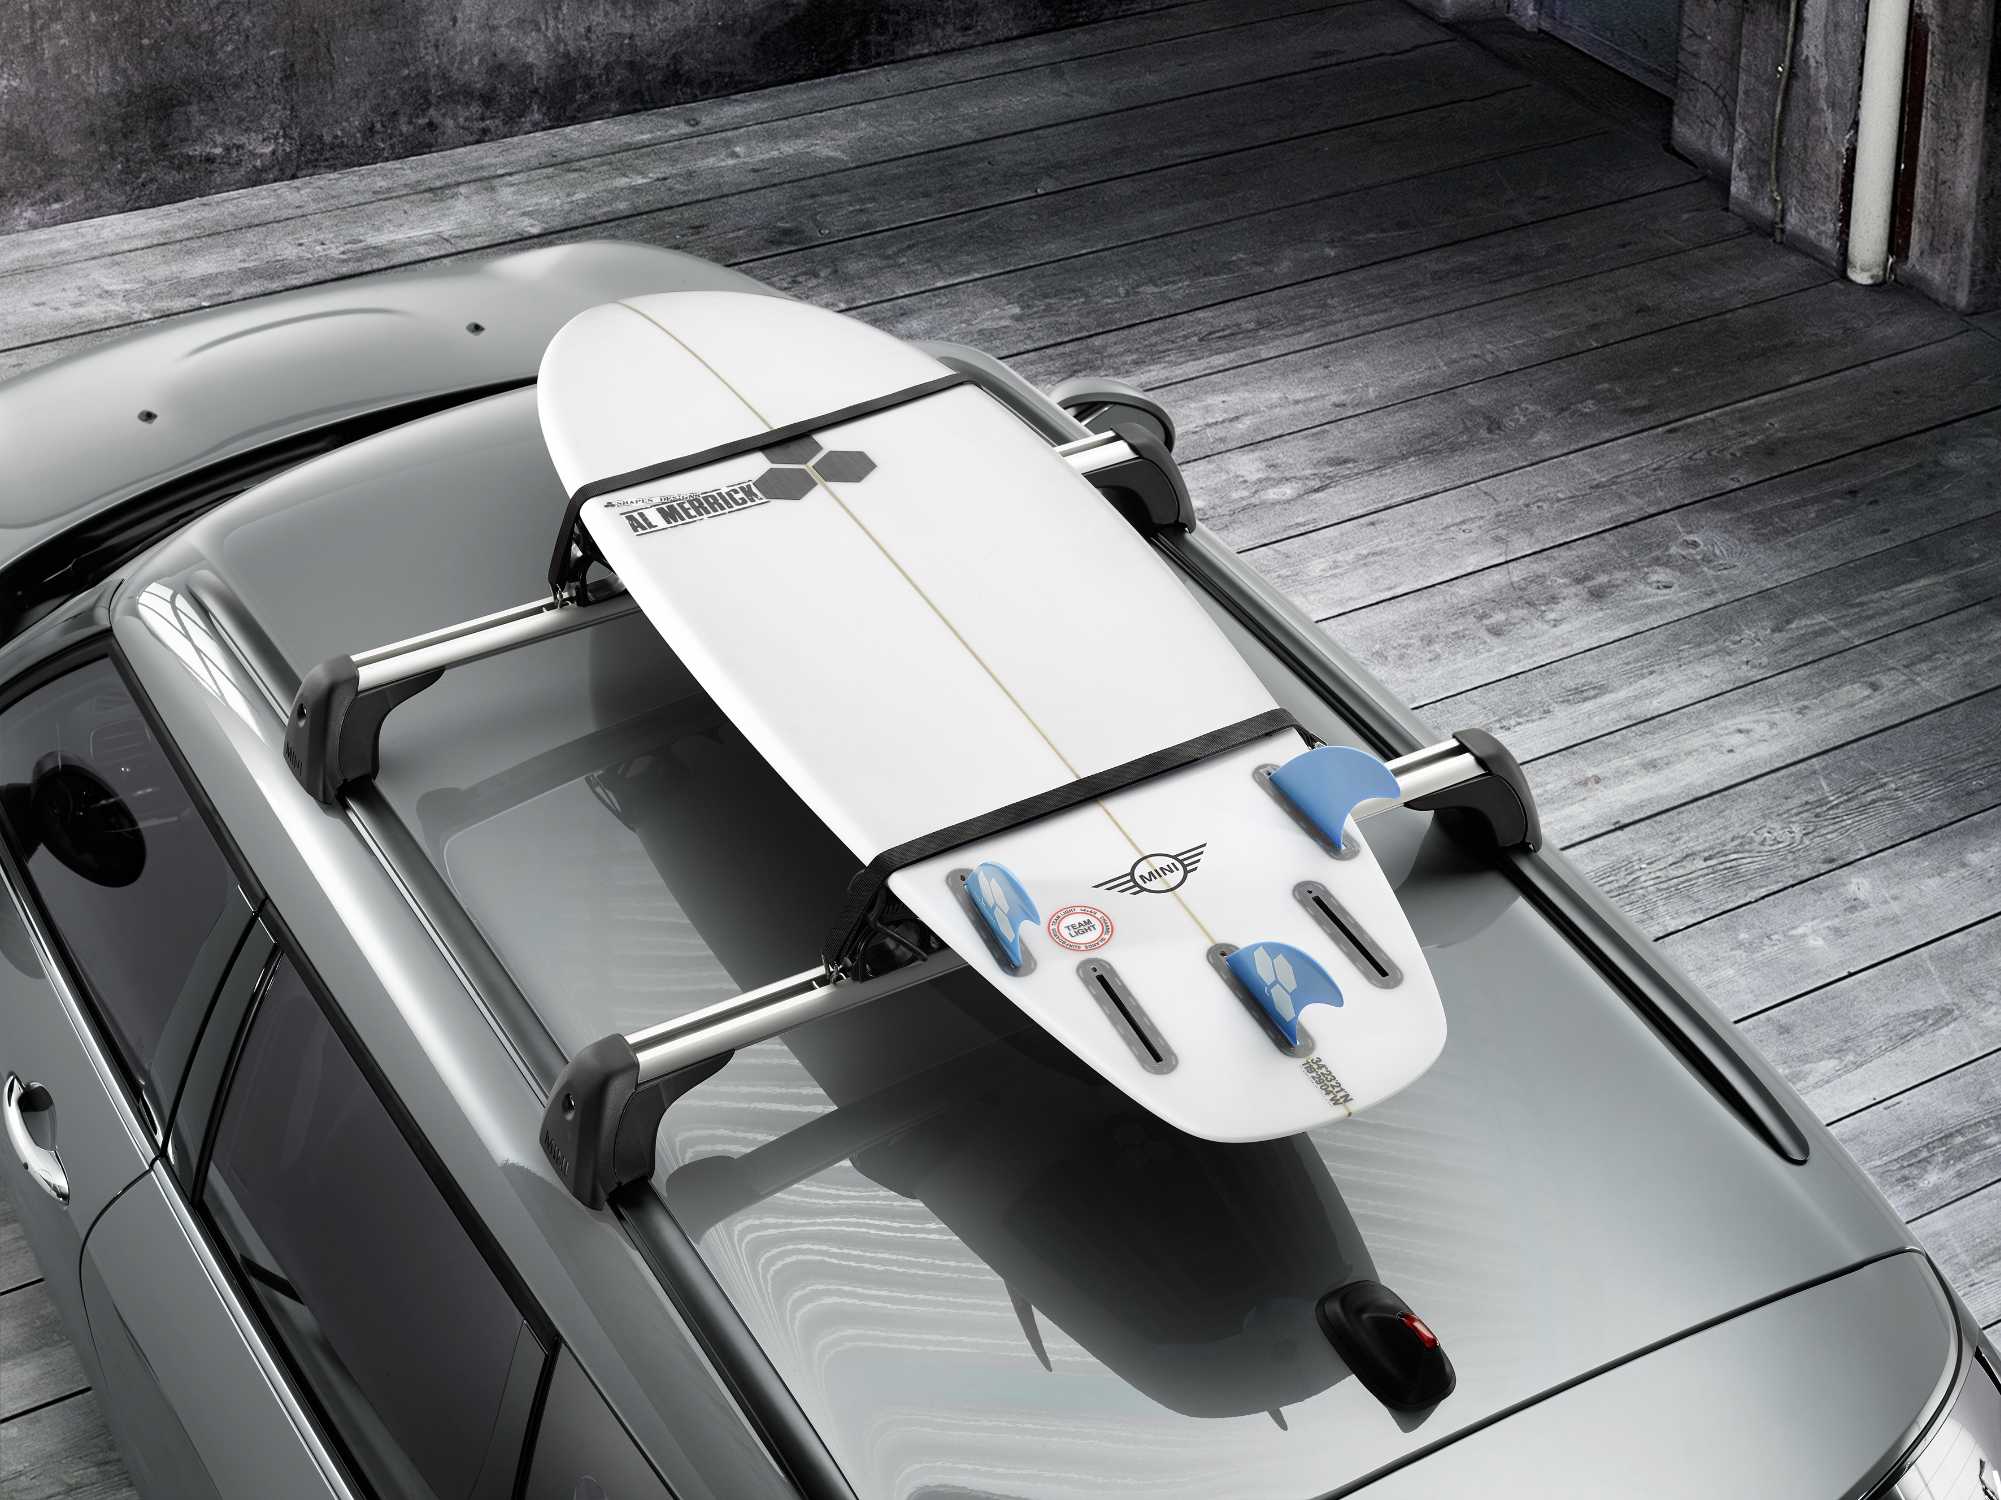 The new MINI Clubman with roof rack base support system for roof rails and surfboard holder. (06